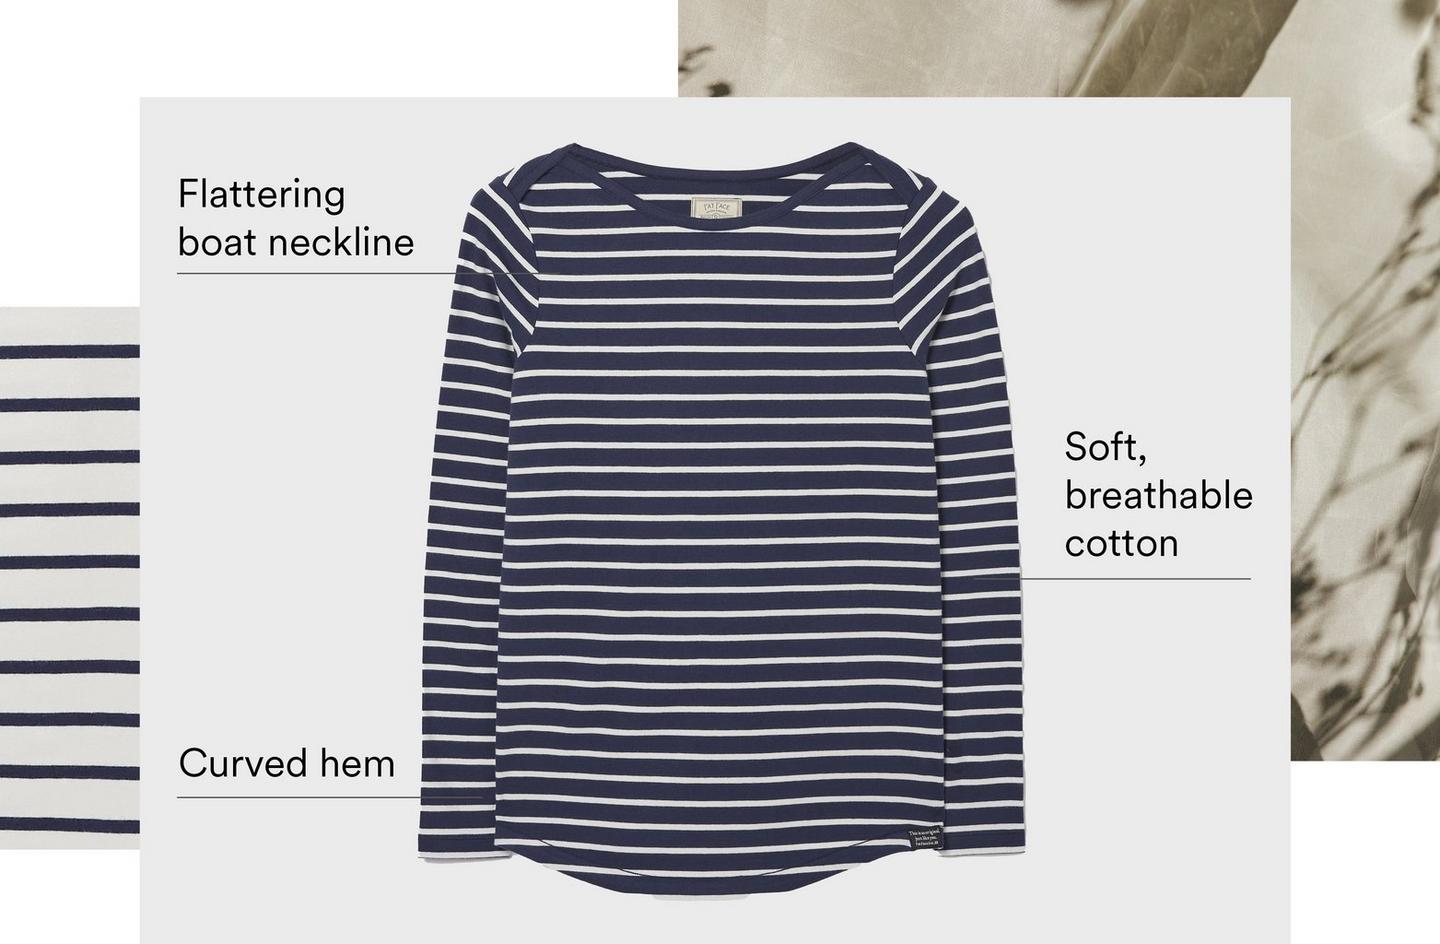 A long-sleeved navy & white Breton style T-shirt, made of soft breathable cotton, with a flattering boat neckline & curved hem.